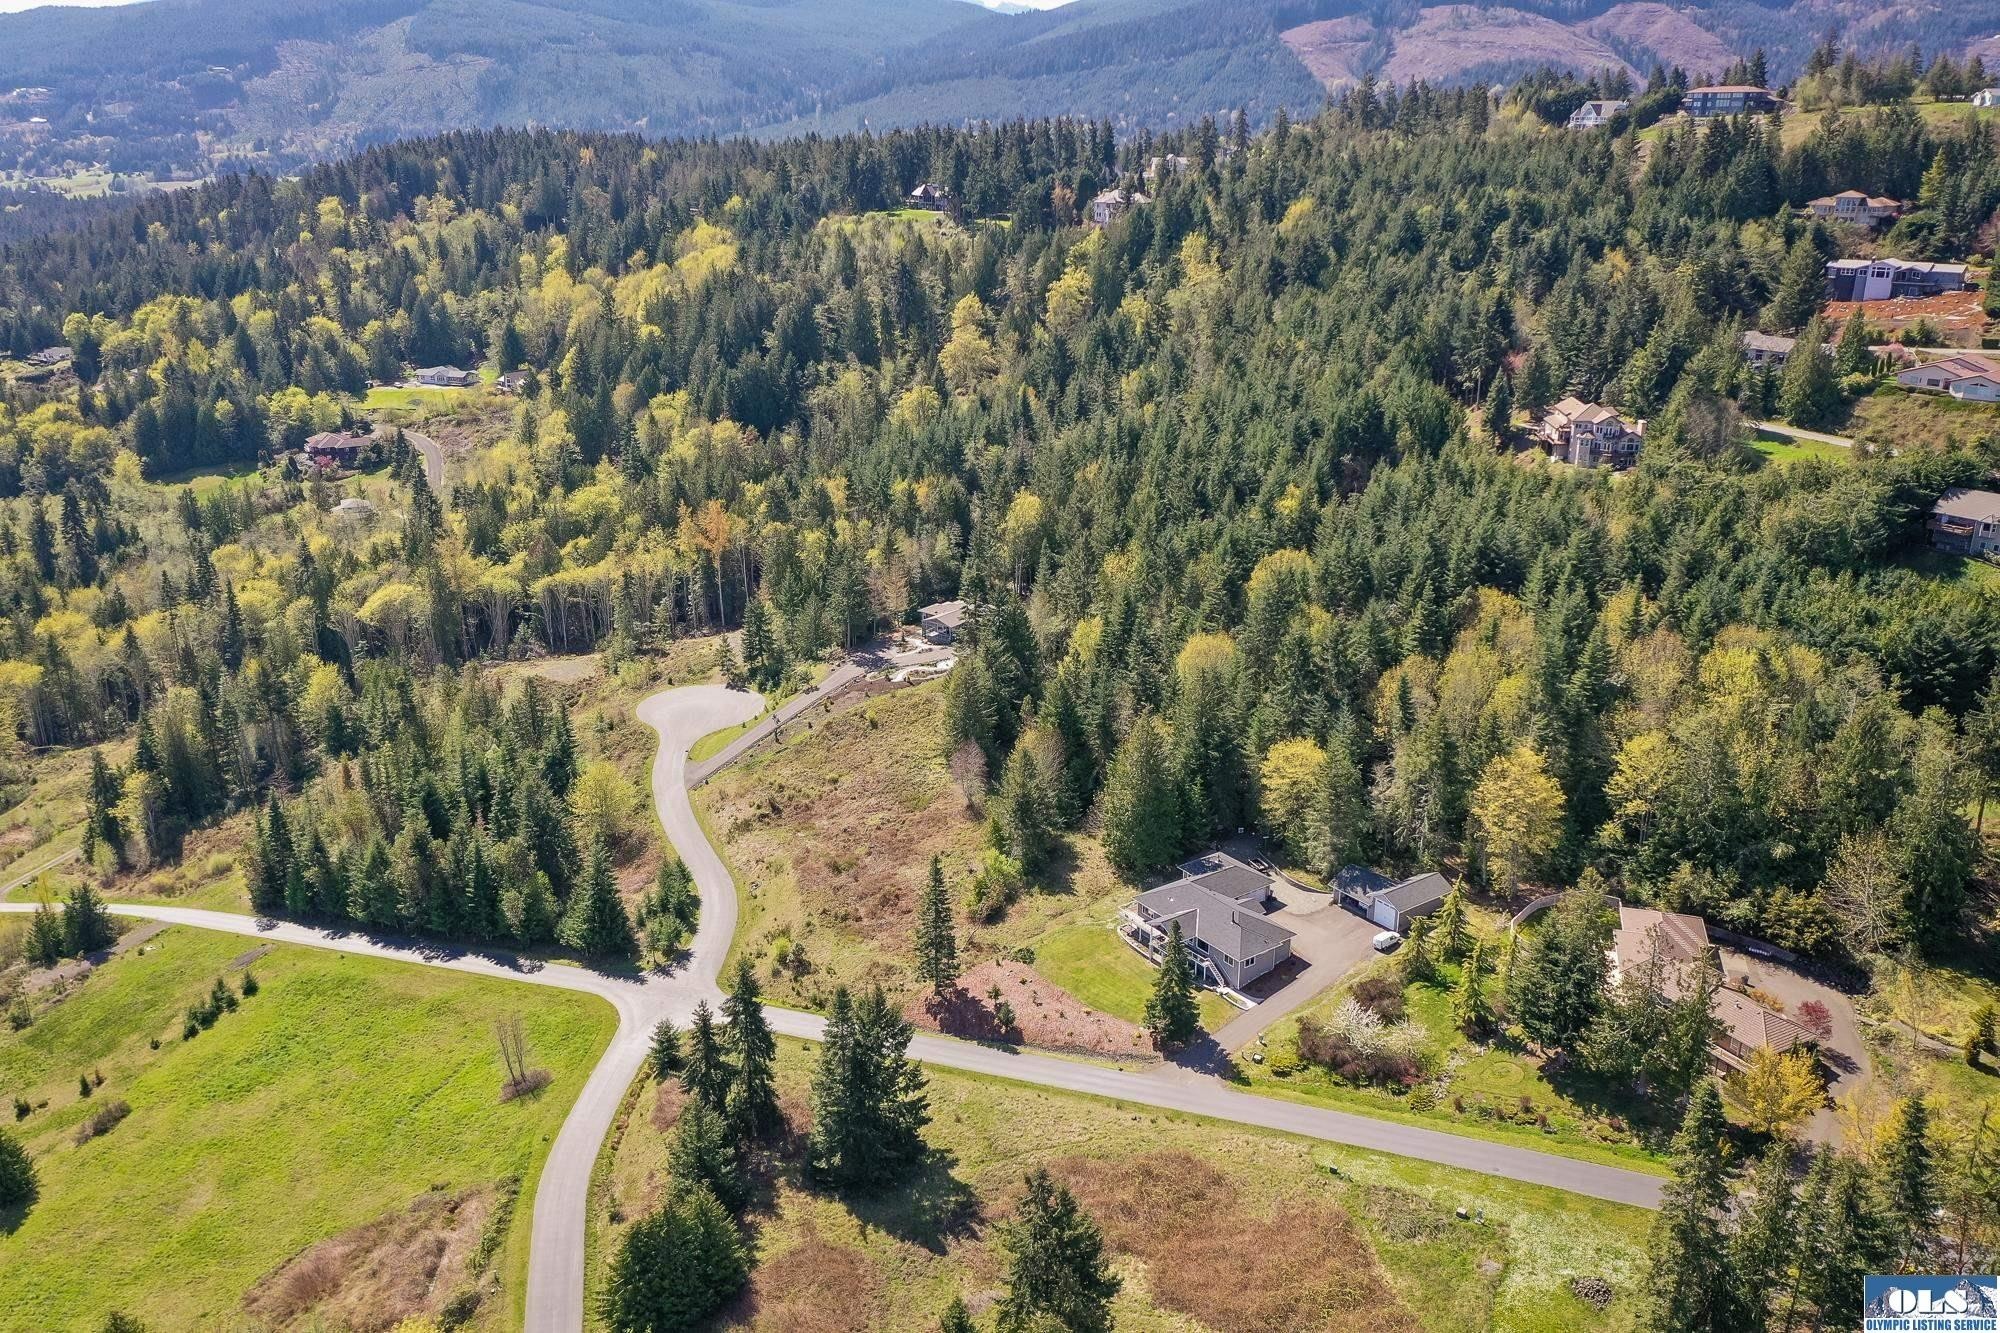 7. Lot 15 High View Way